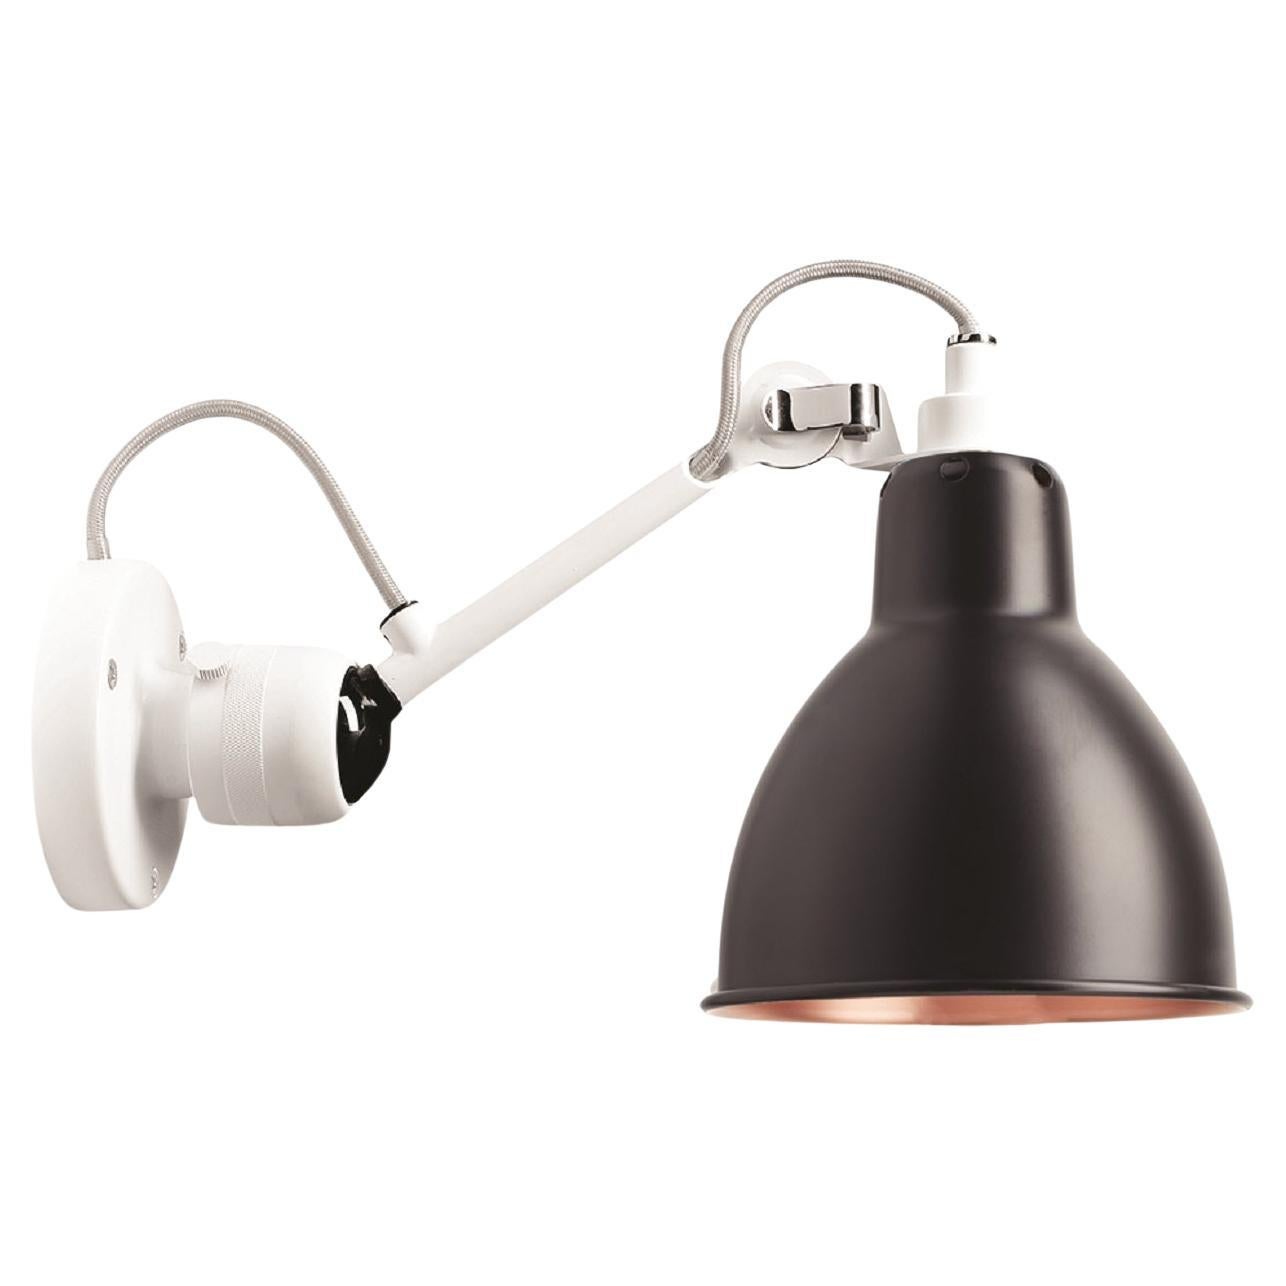 DCW Editions La Lampe Gras N°304 Wall Lamp in White Arm and Black Copper Shade For Sale